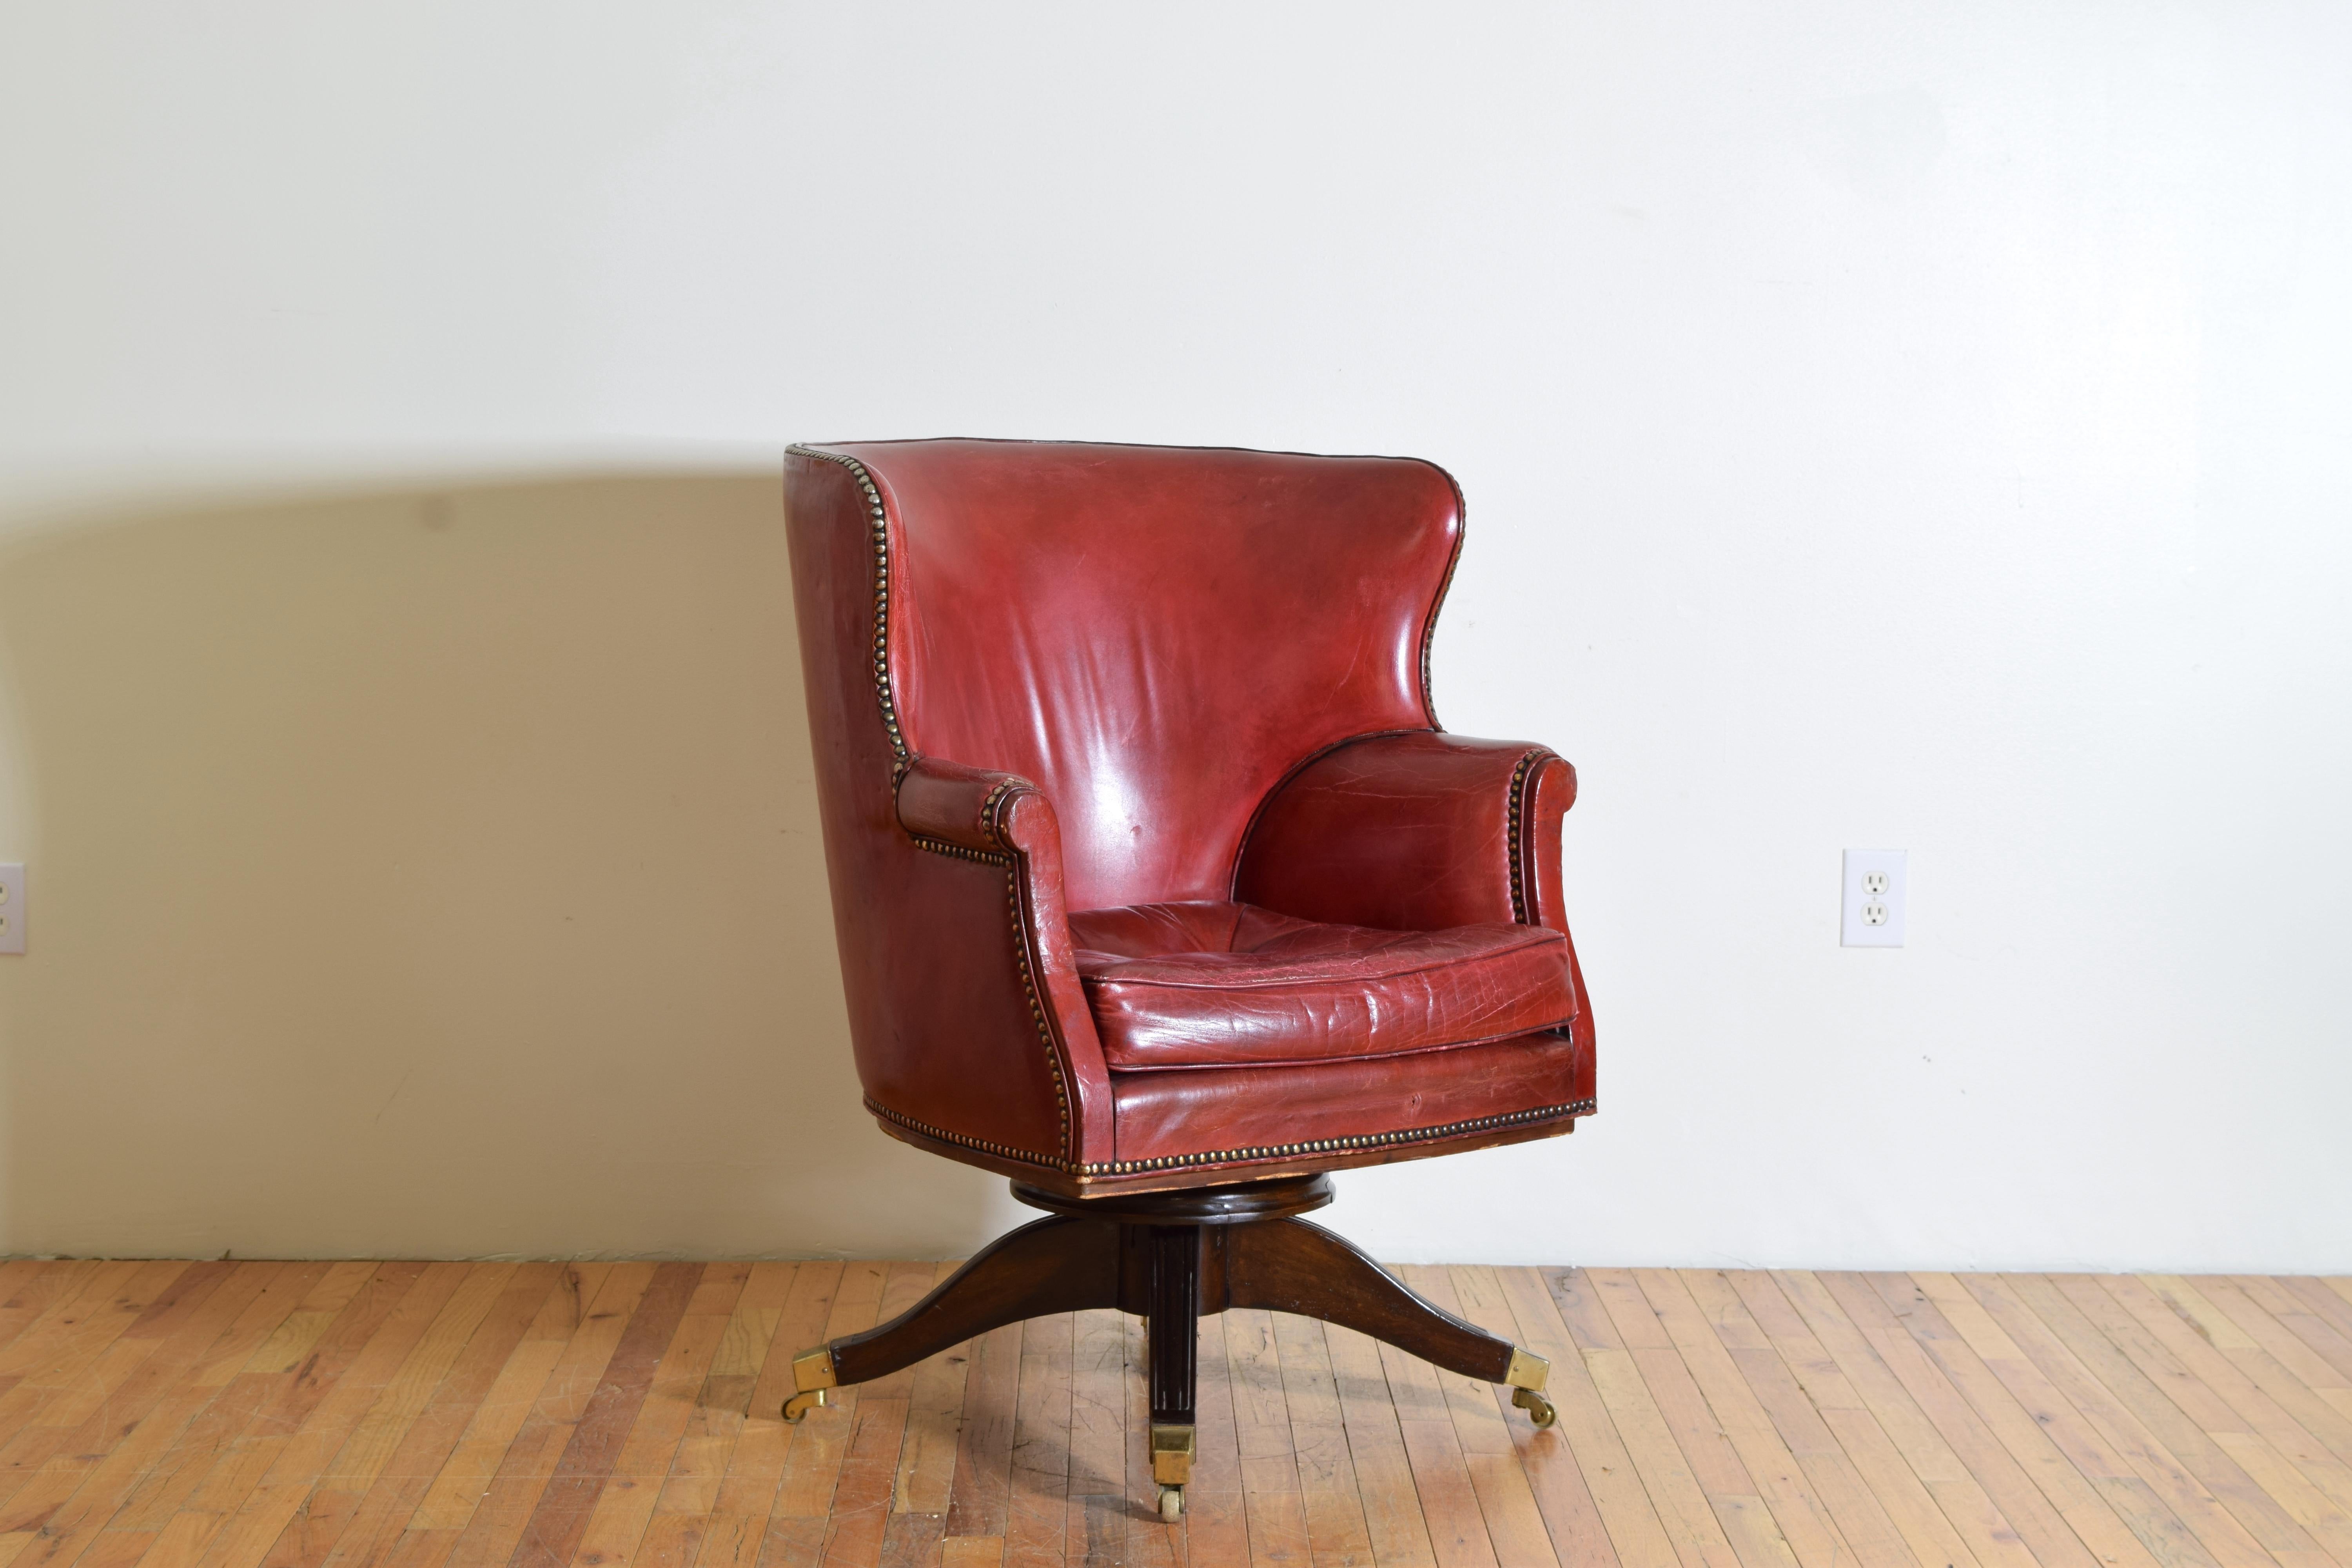 Having a concave backrest with wrap around wings, the leather trimmed in brass nailheads, with tufting to the backrest, raised on fluted and splayed mahogany legs ending in brass casters